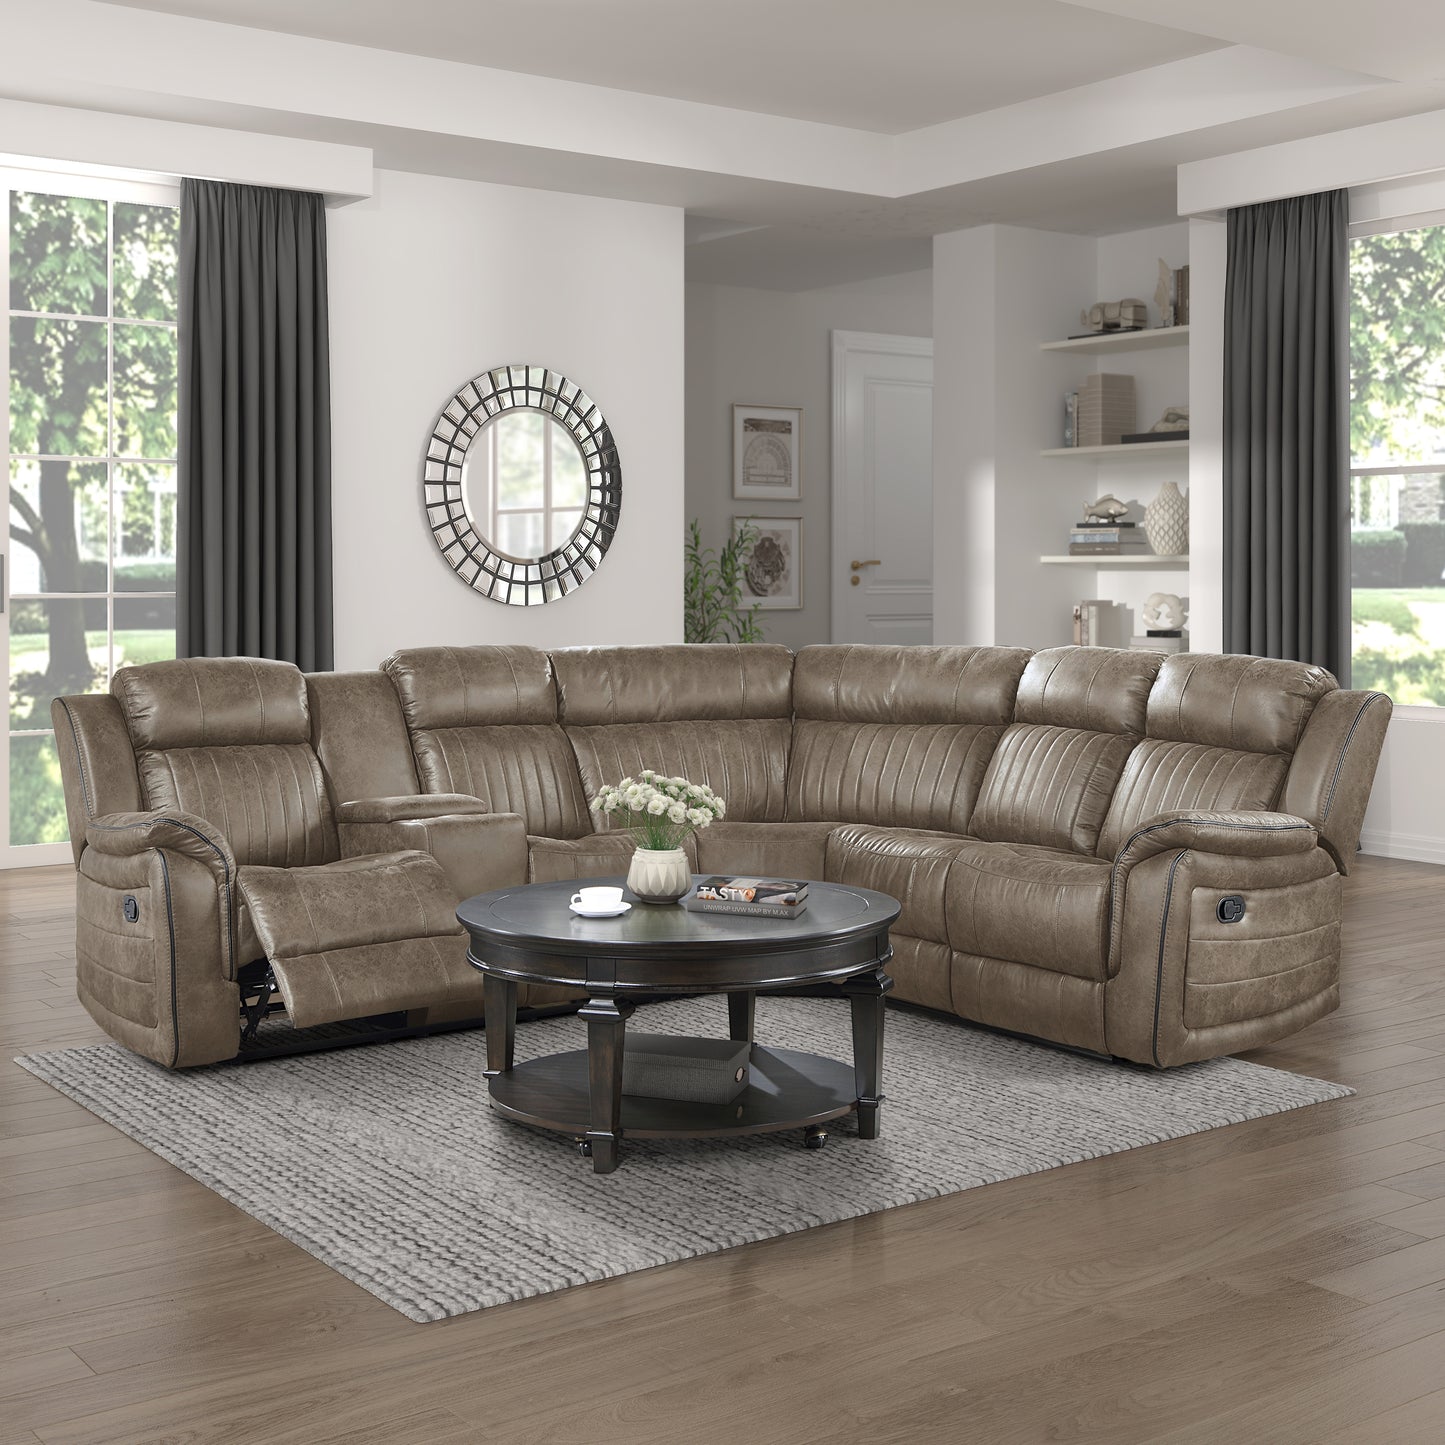 Centeroak 3-Piece Reclining Sectional with Left Console BROWN